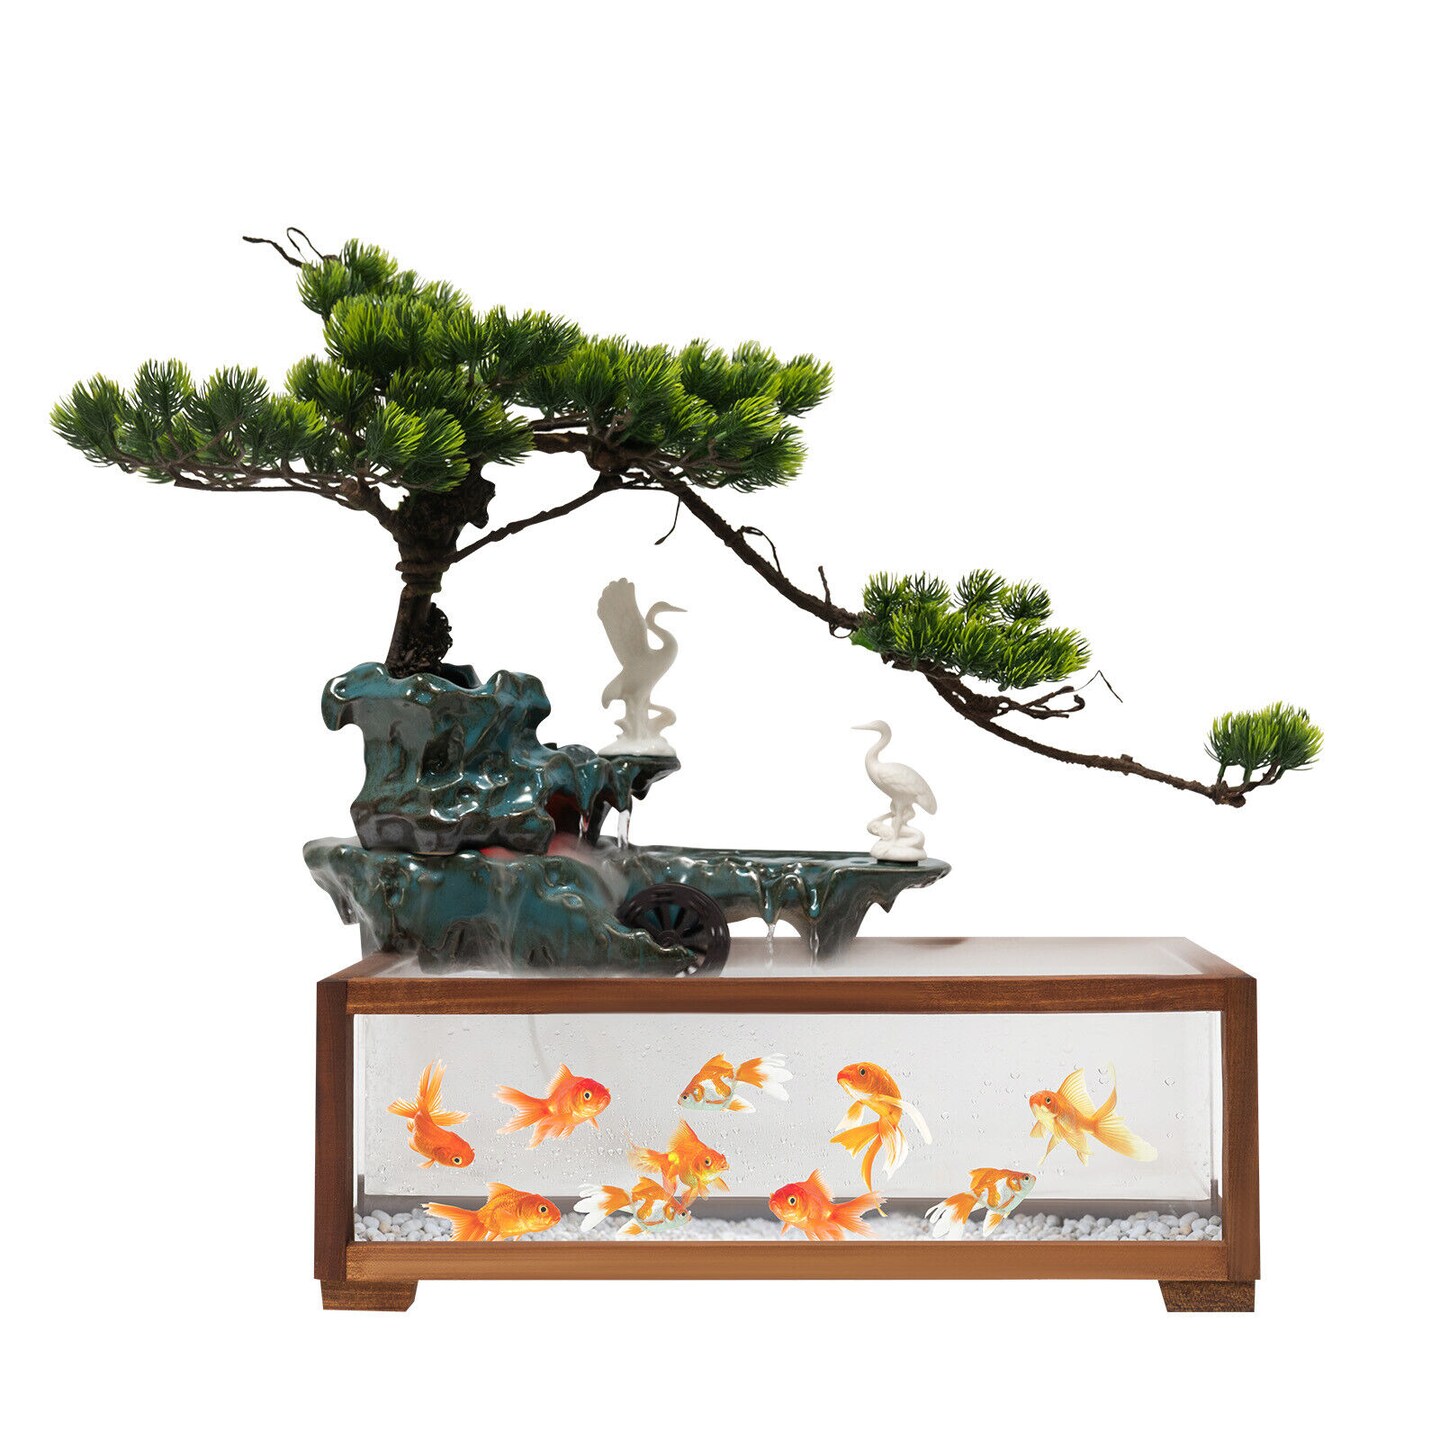 Antique Water Fountain with LED Light and Fish Tank